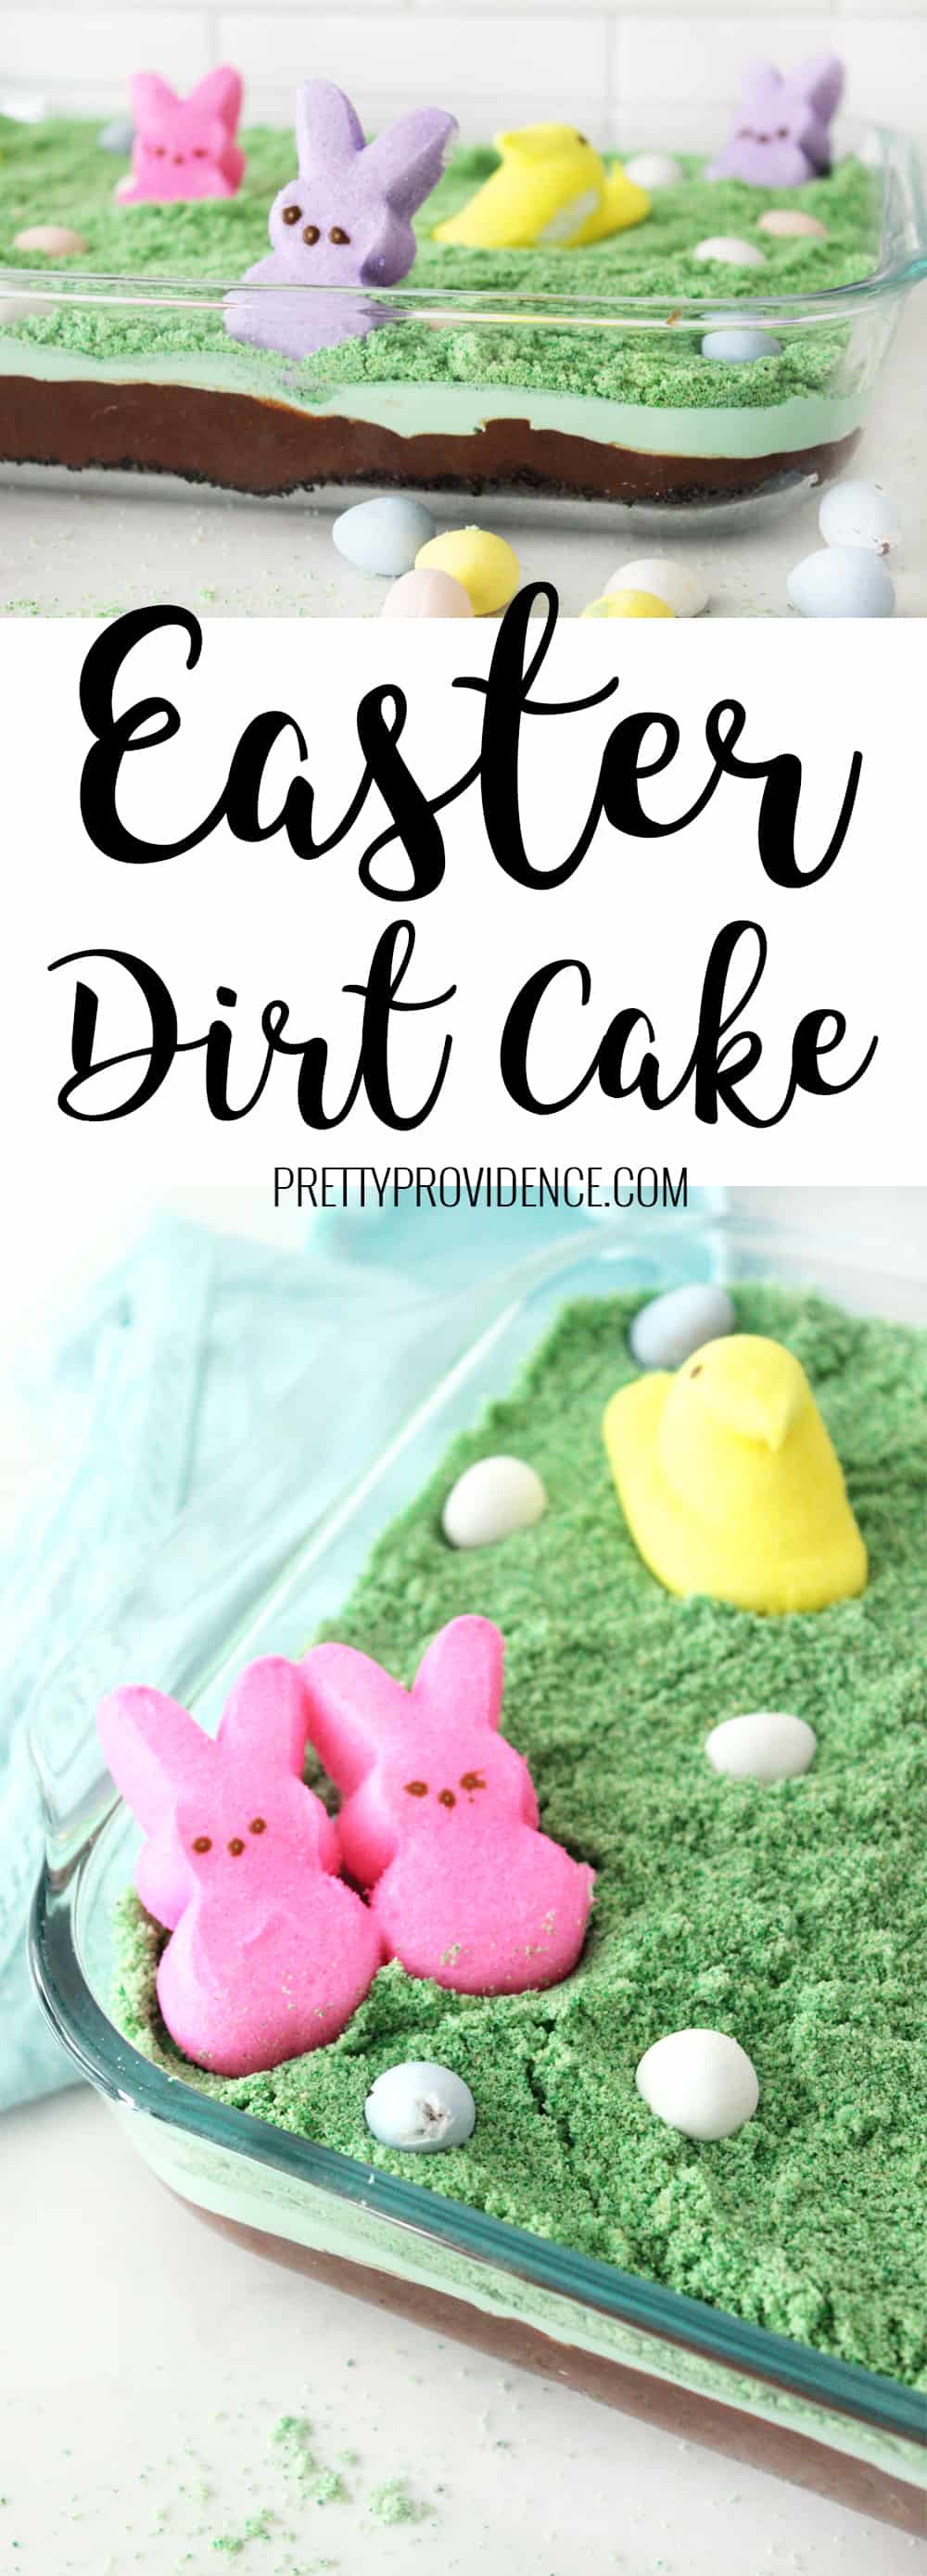 Fun and Easy Easter Dirt Cake